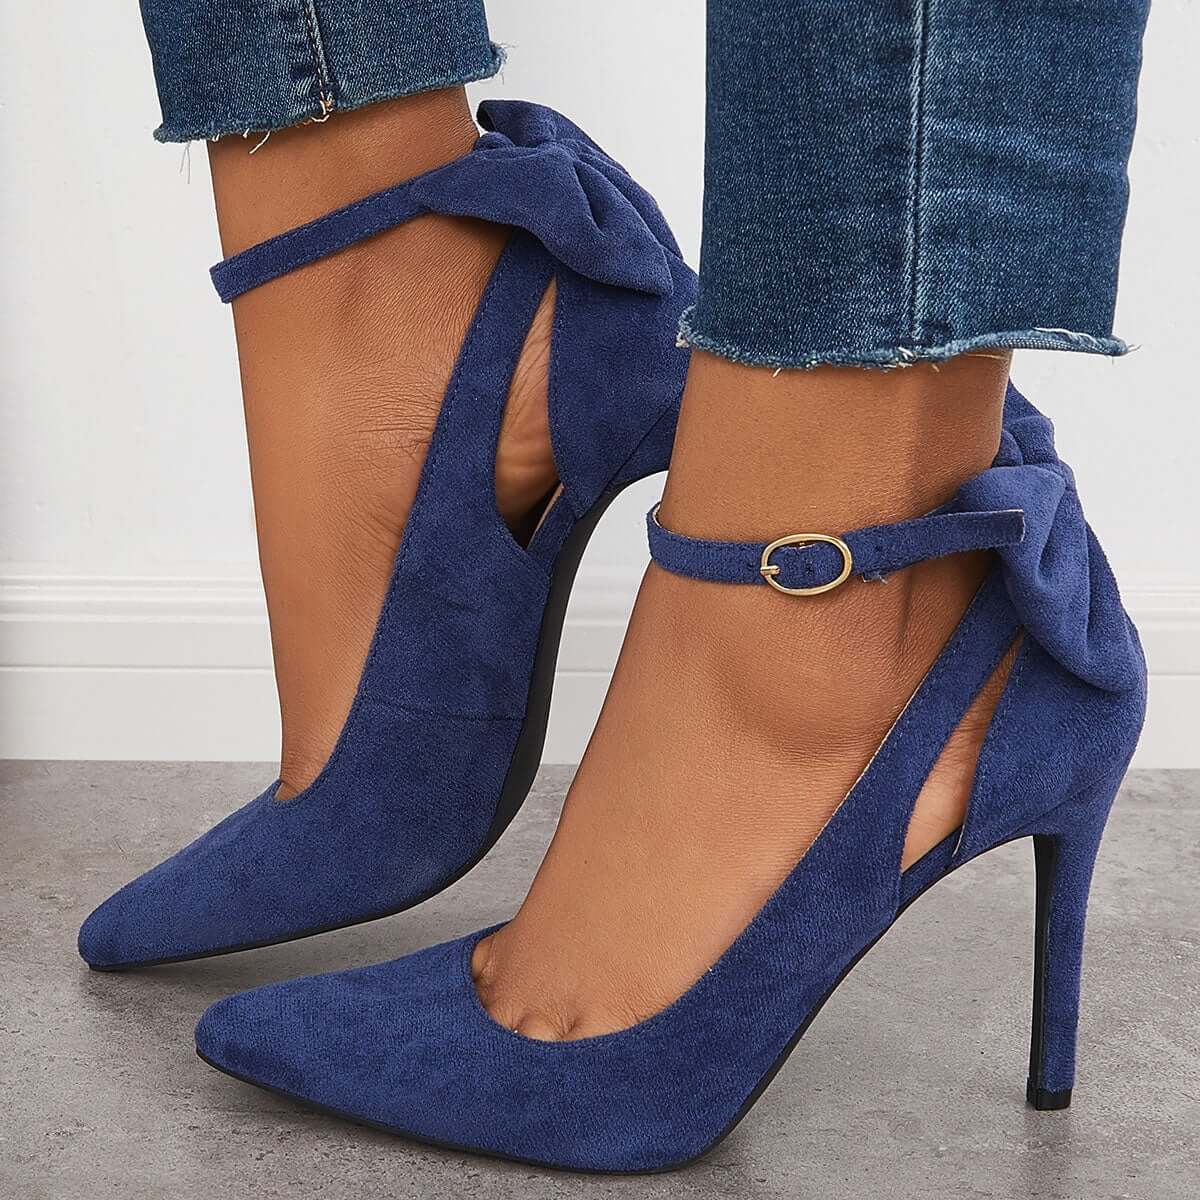 Veooy Bowknot Pointed Toe Stiletto Heels Ankle Strap Dress Pumps